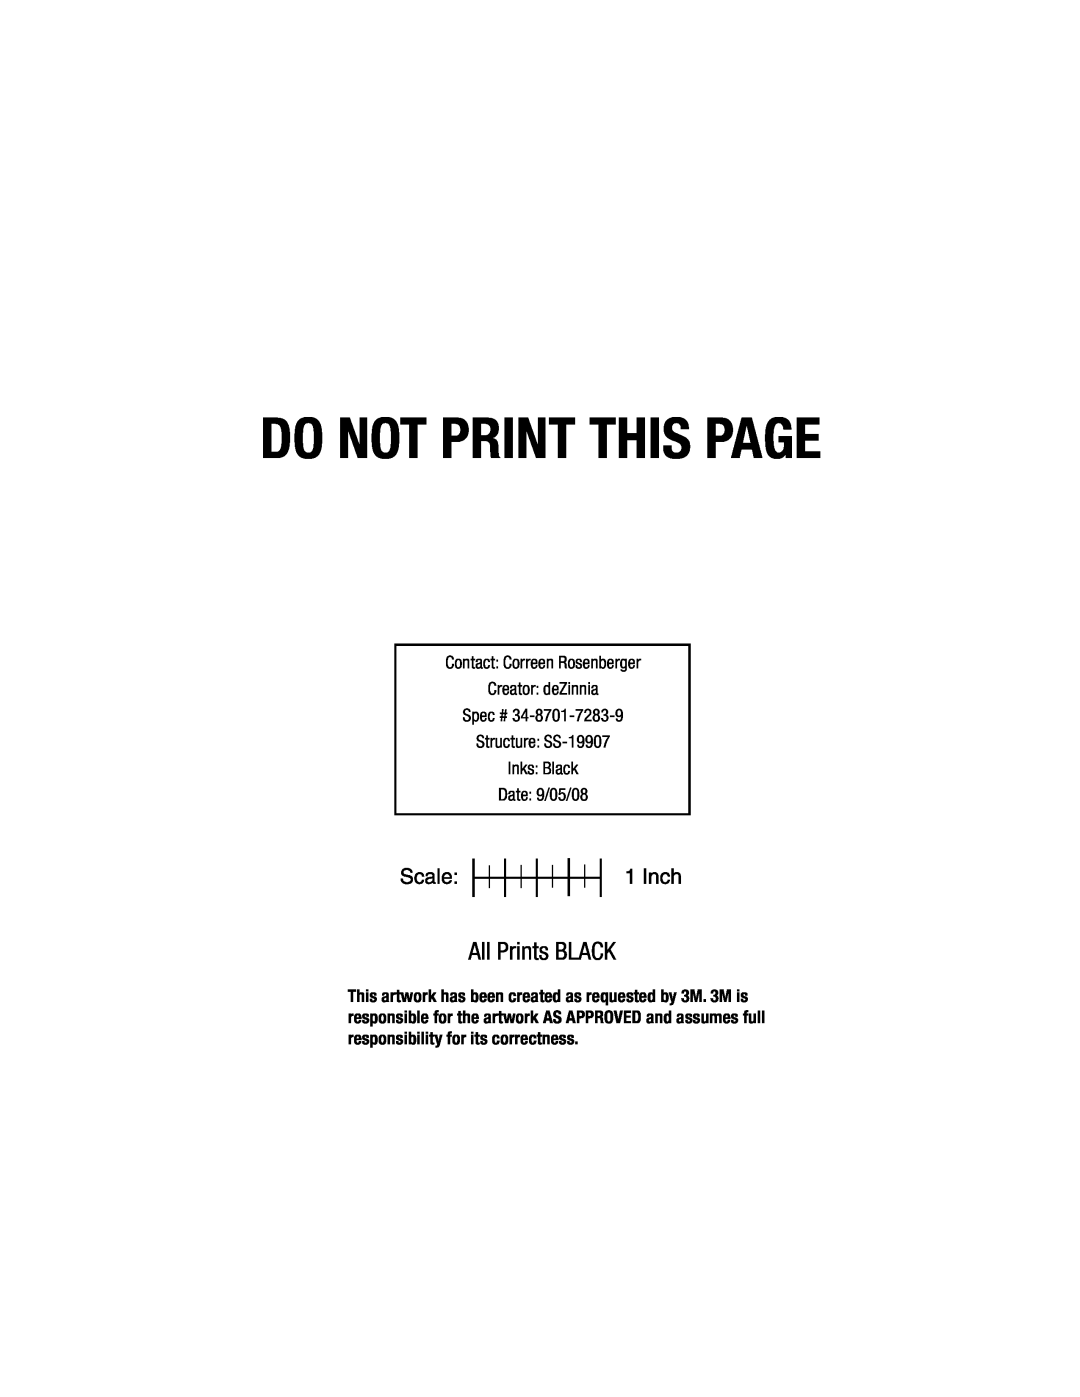 3M Series 57ZZ, Series 57UL, Series 55ZZ, Series 56ZZ, Series 52 owner manual Do Not Print This Page, All Prints BLACK 